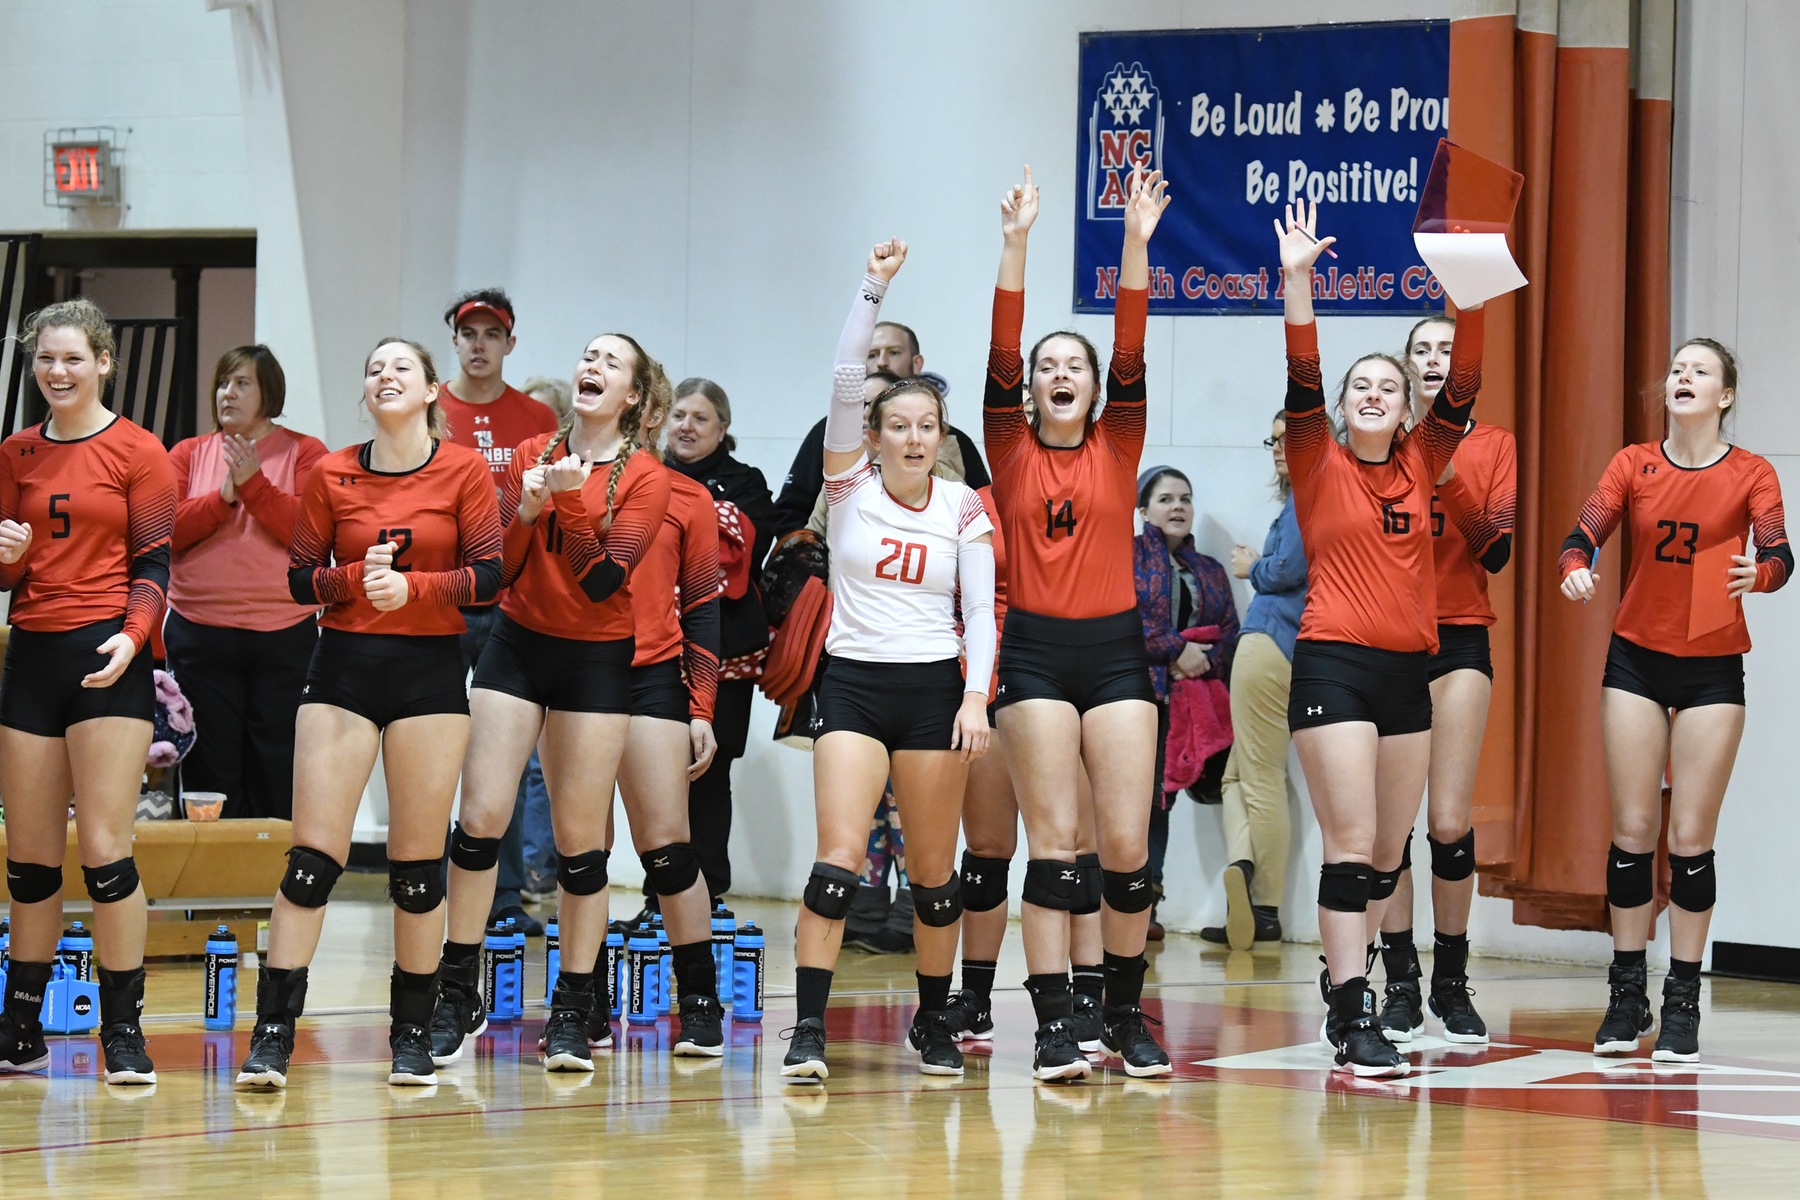 The third-ranked Wittenberg women's volleyball team wrapped up the regular season with a thrilling 3-2 come-from-behind win over Earlham on Tuesday night